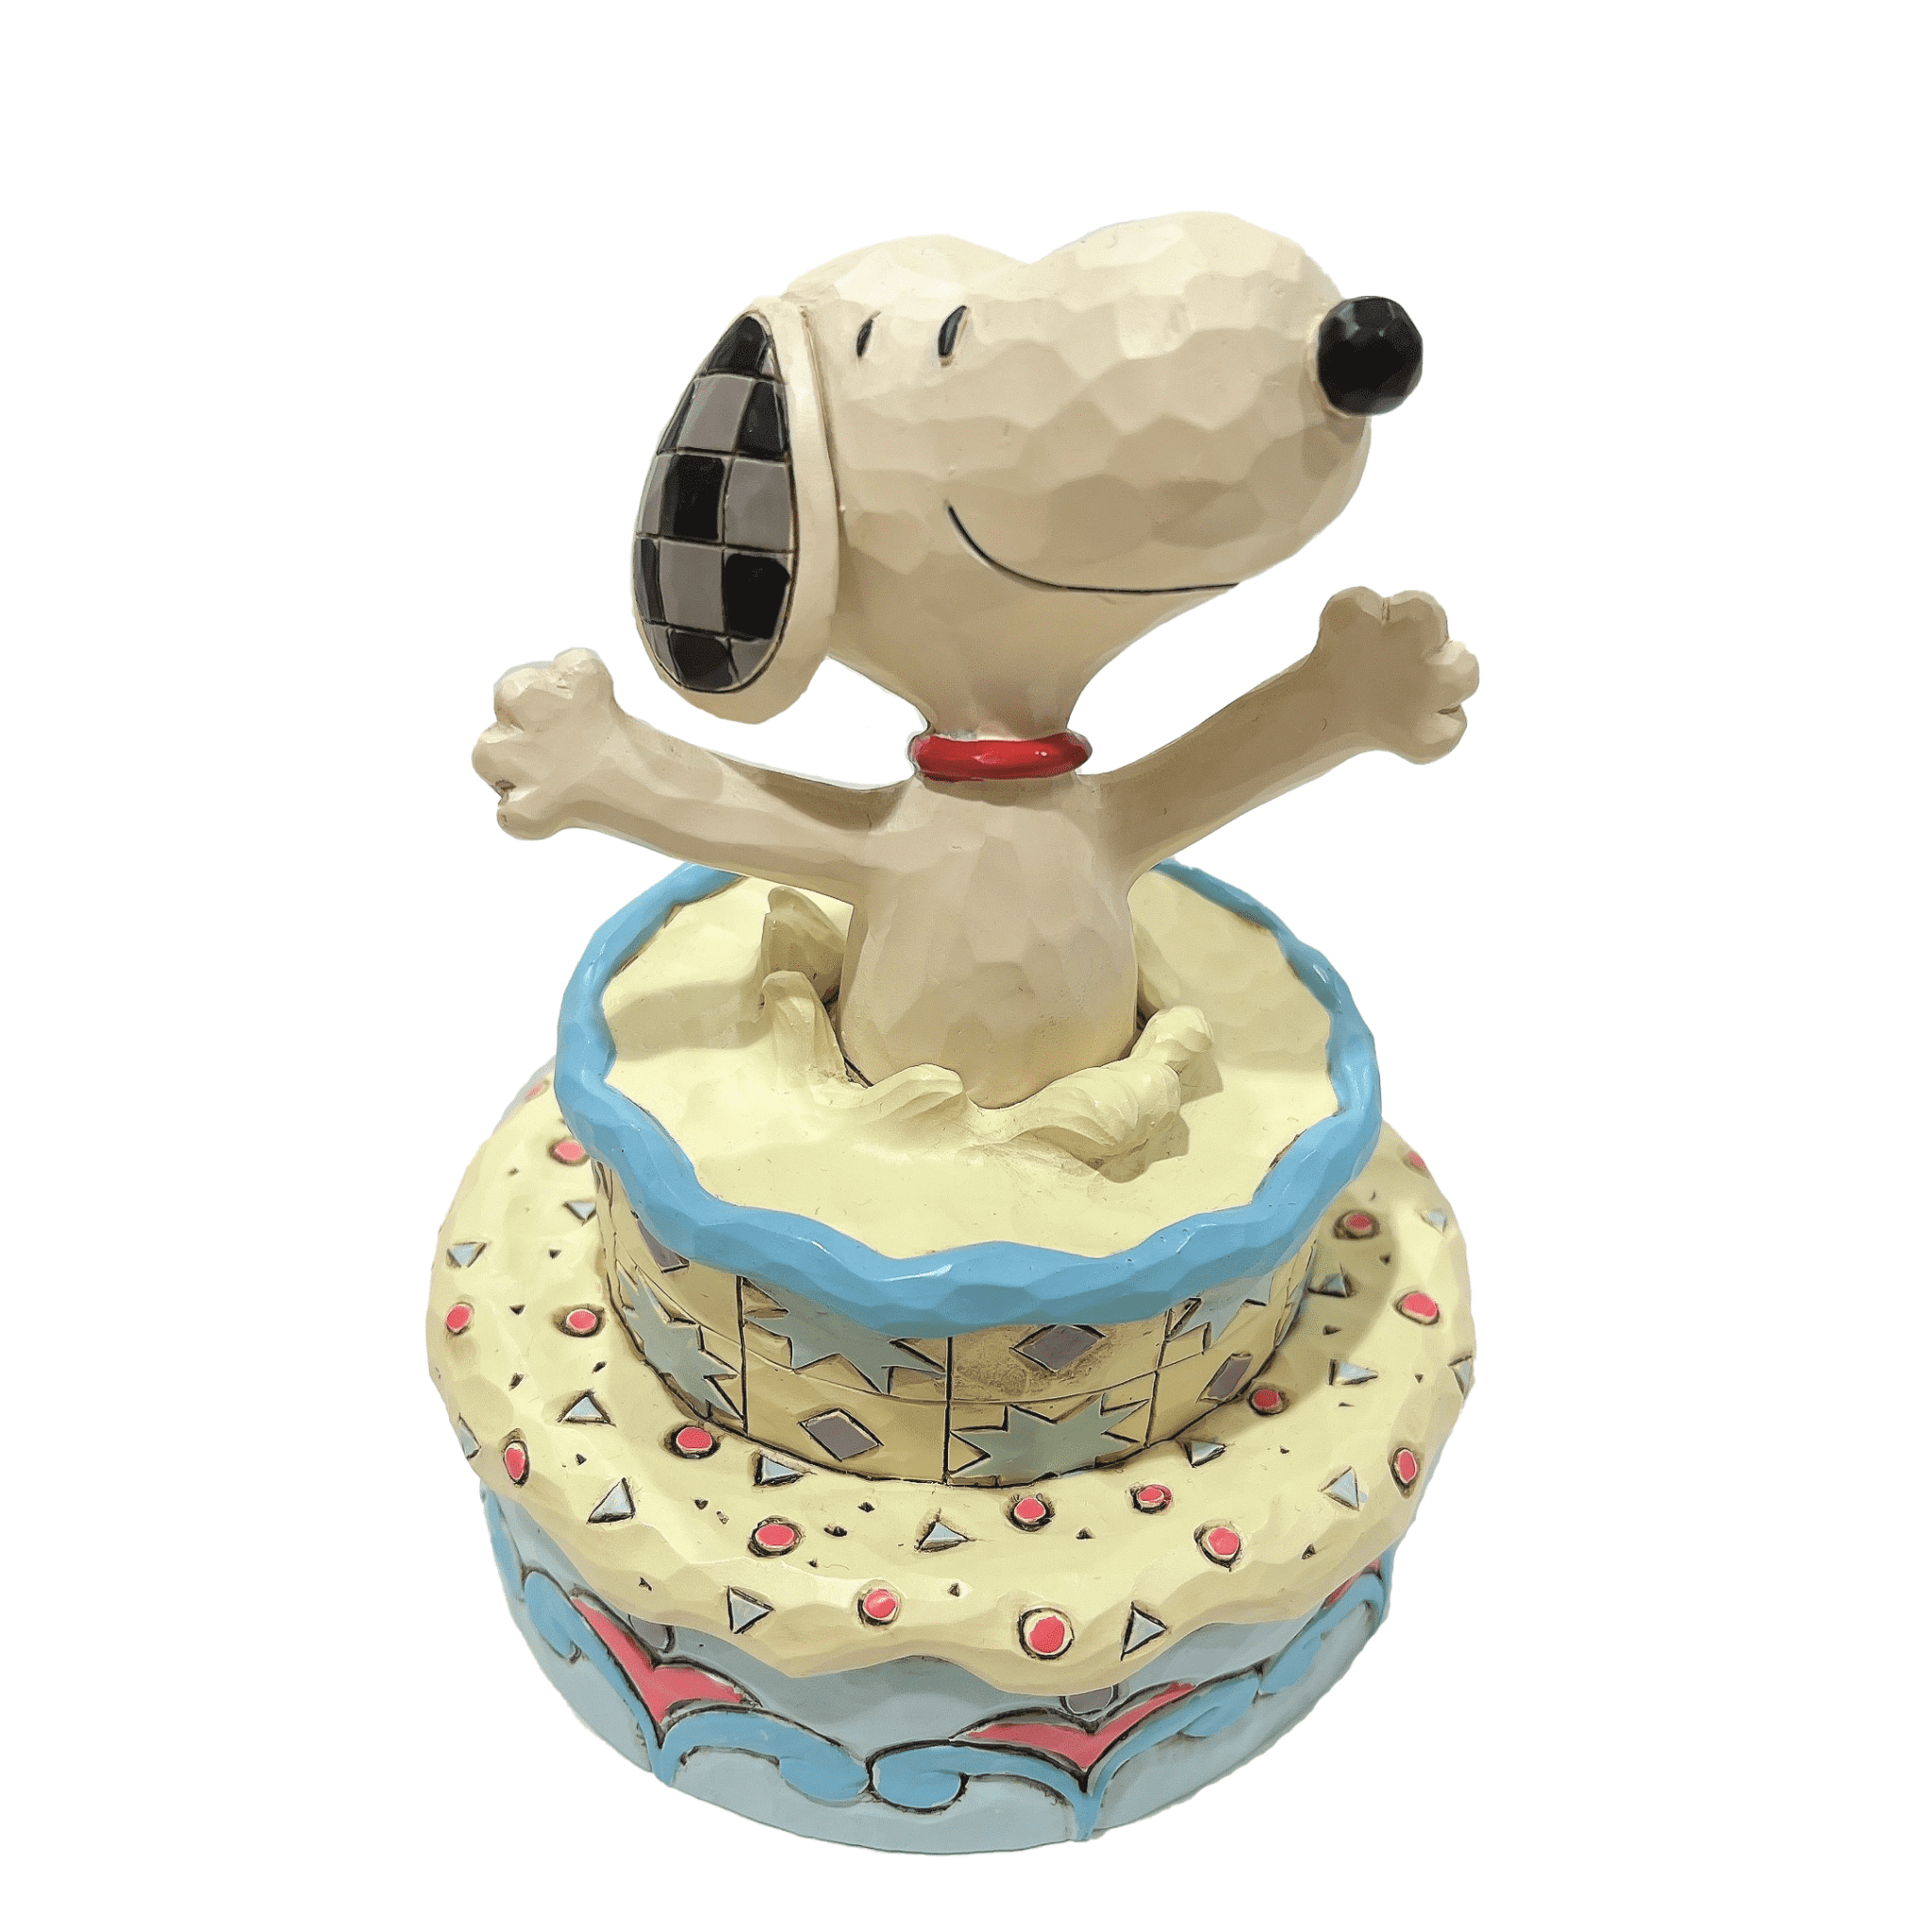 Snoopy Jumping out of Birthday Cake